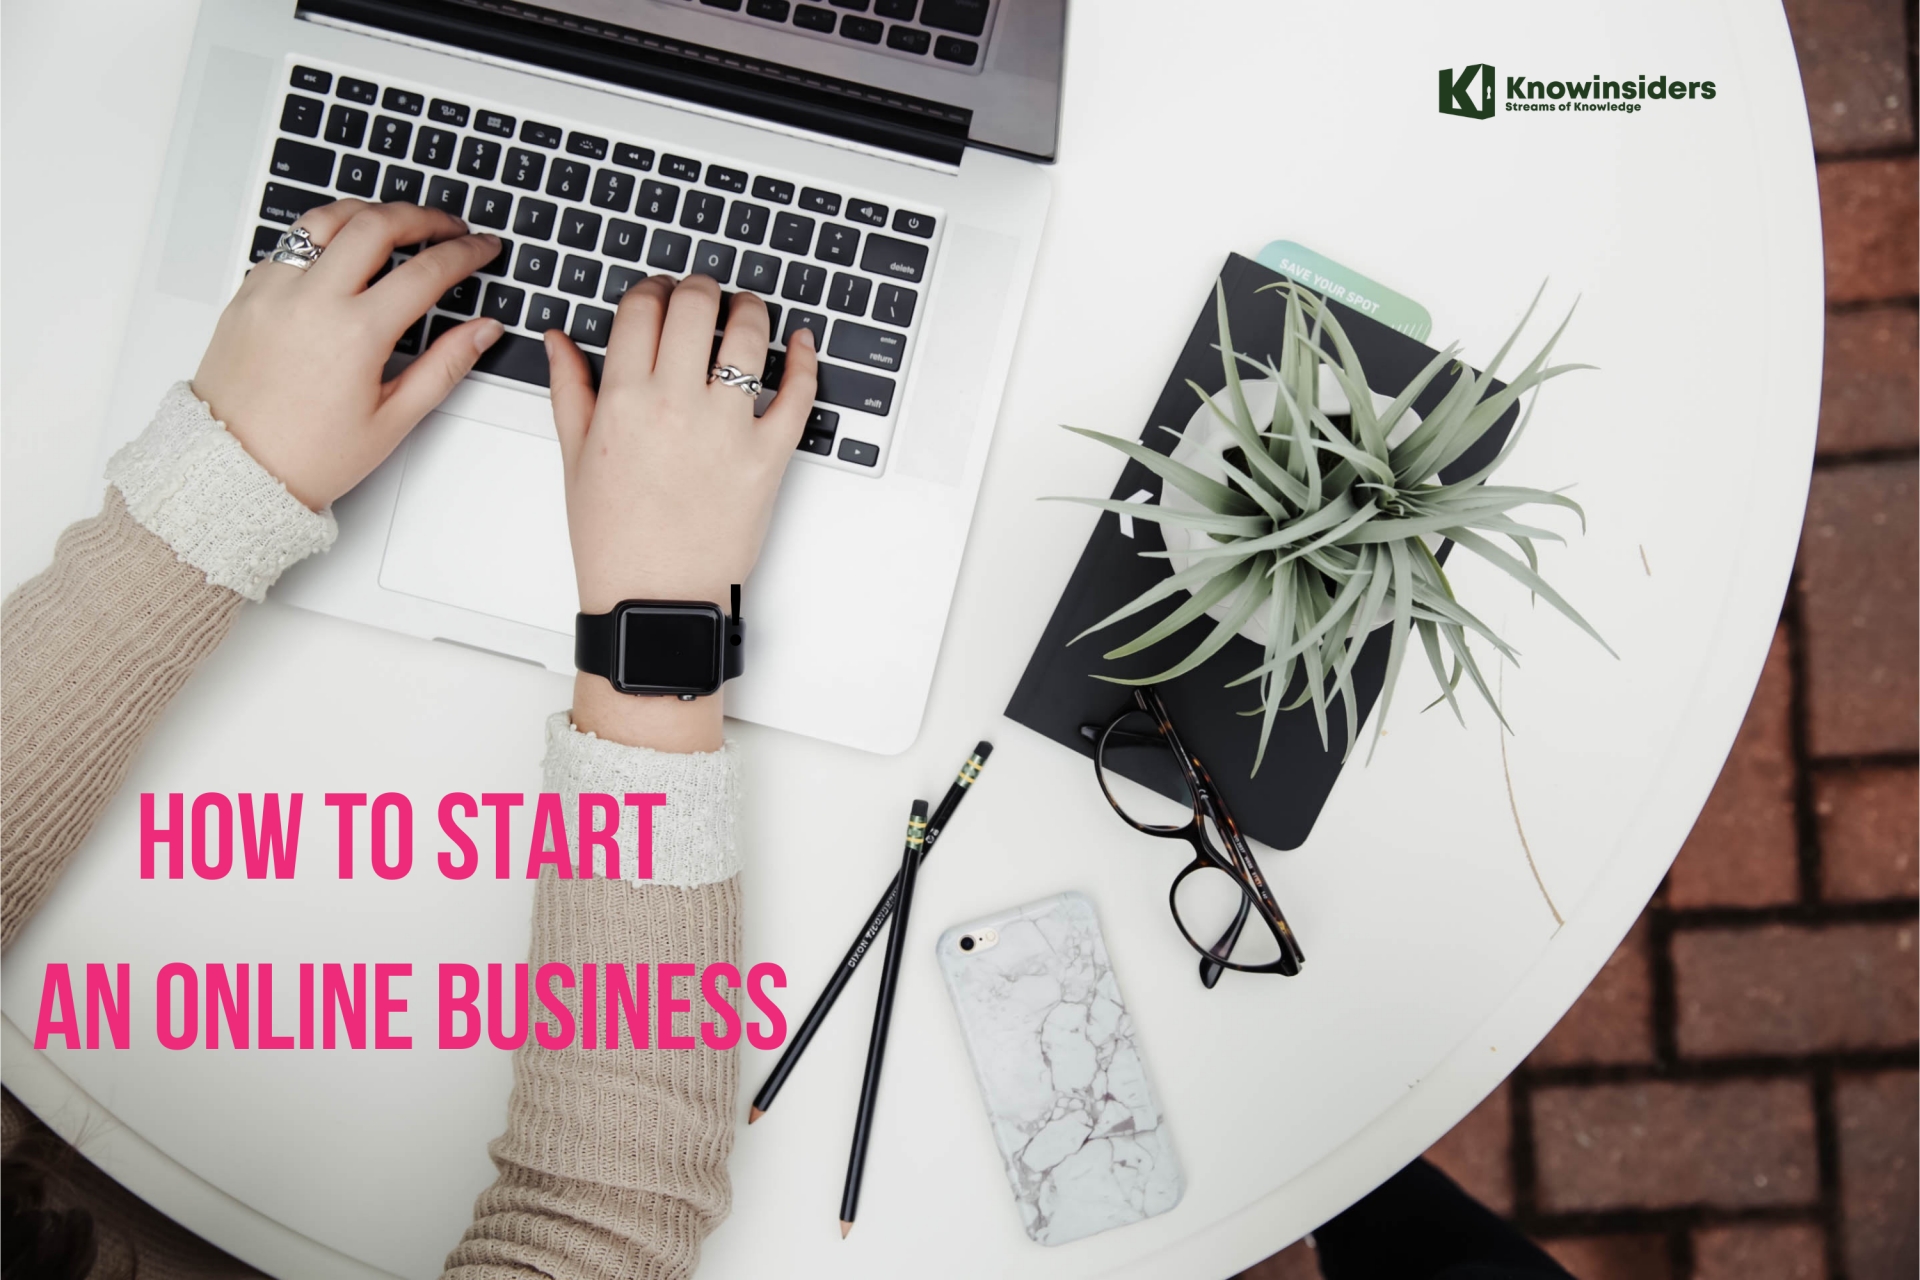 How To Start An Online Business: Best Ideas and Tips For Success